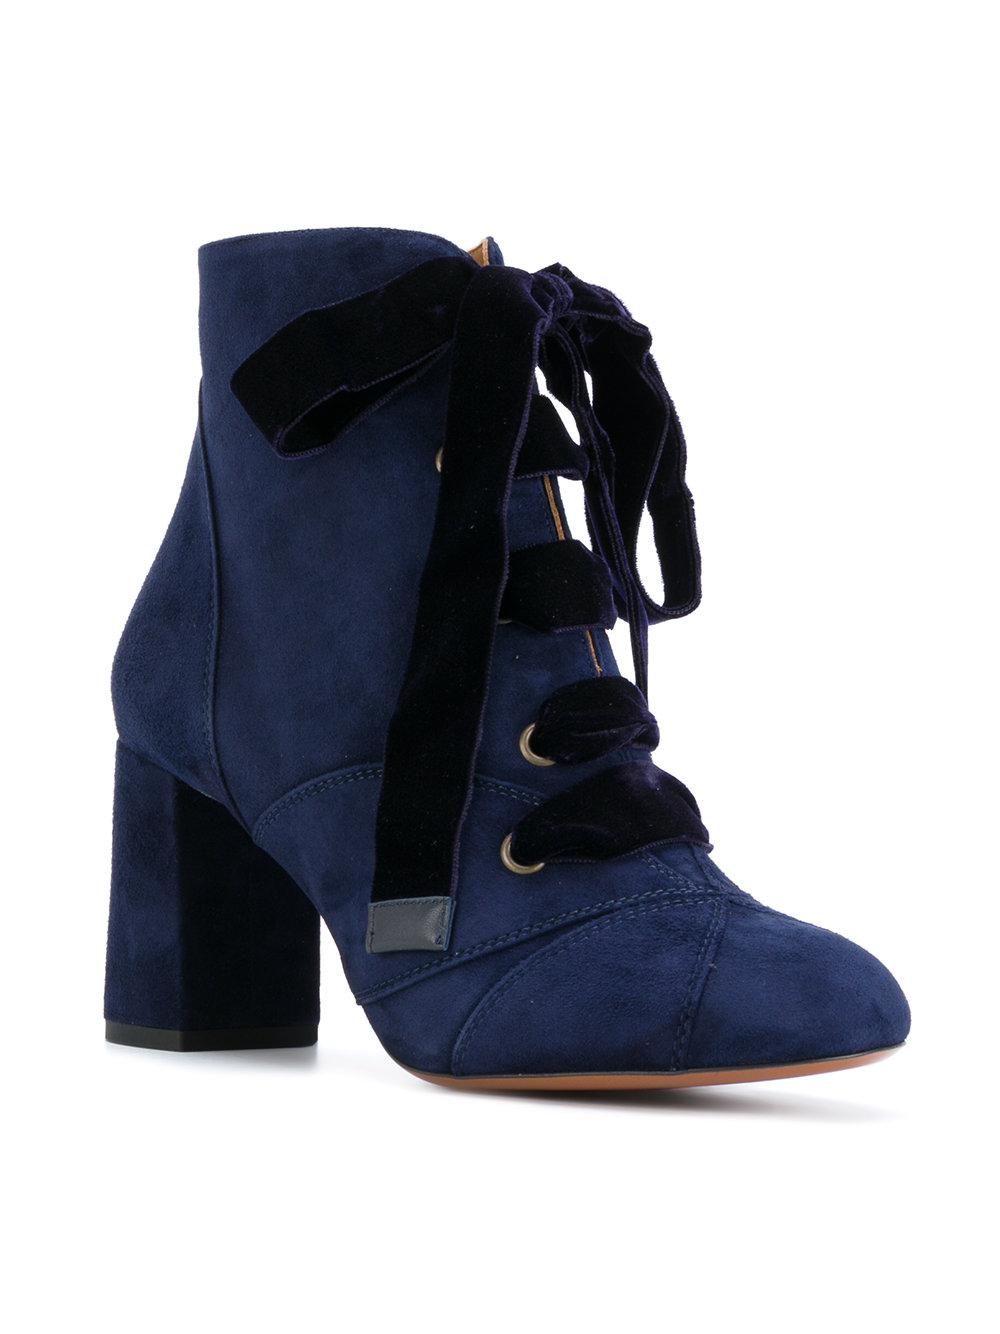 Chloé Velvet Laced Booties in Blue - Lyst